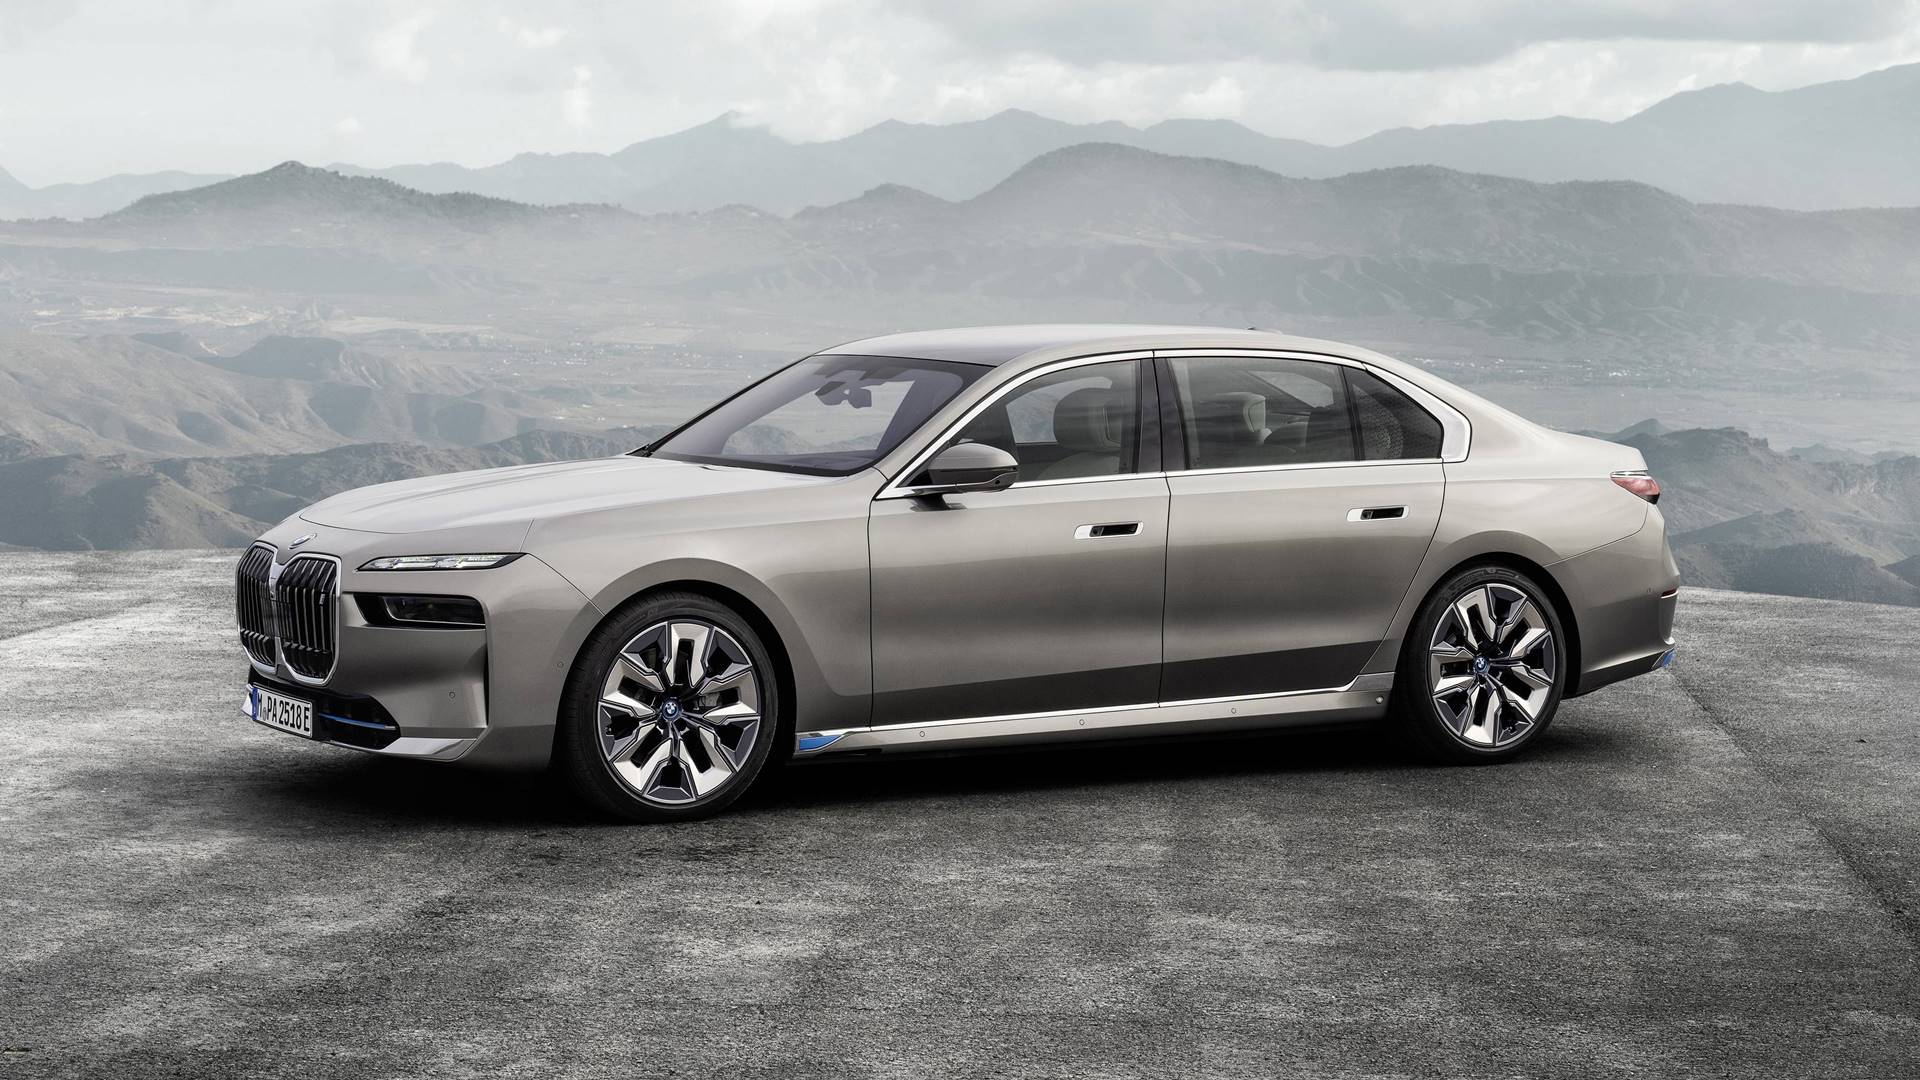 BMW i7 to be sold in Spain from 137,900 euros - Latest Car News